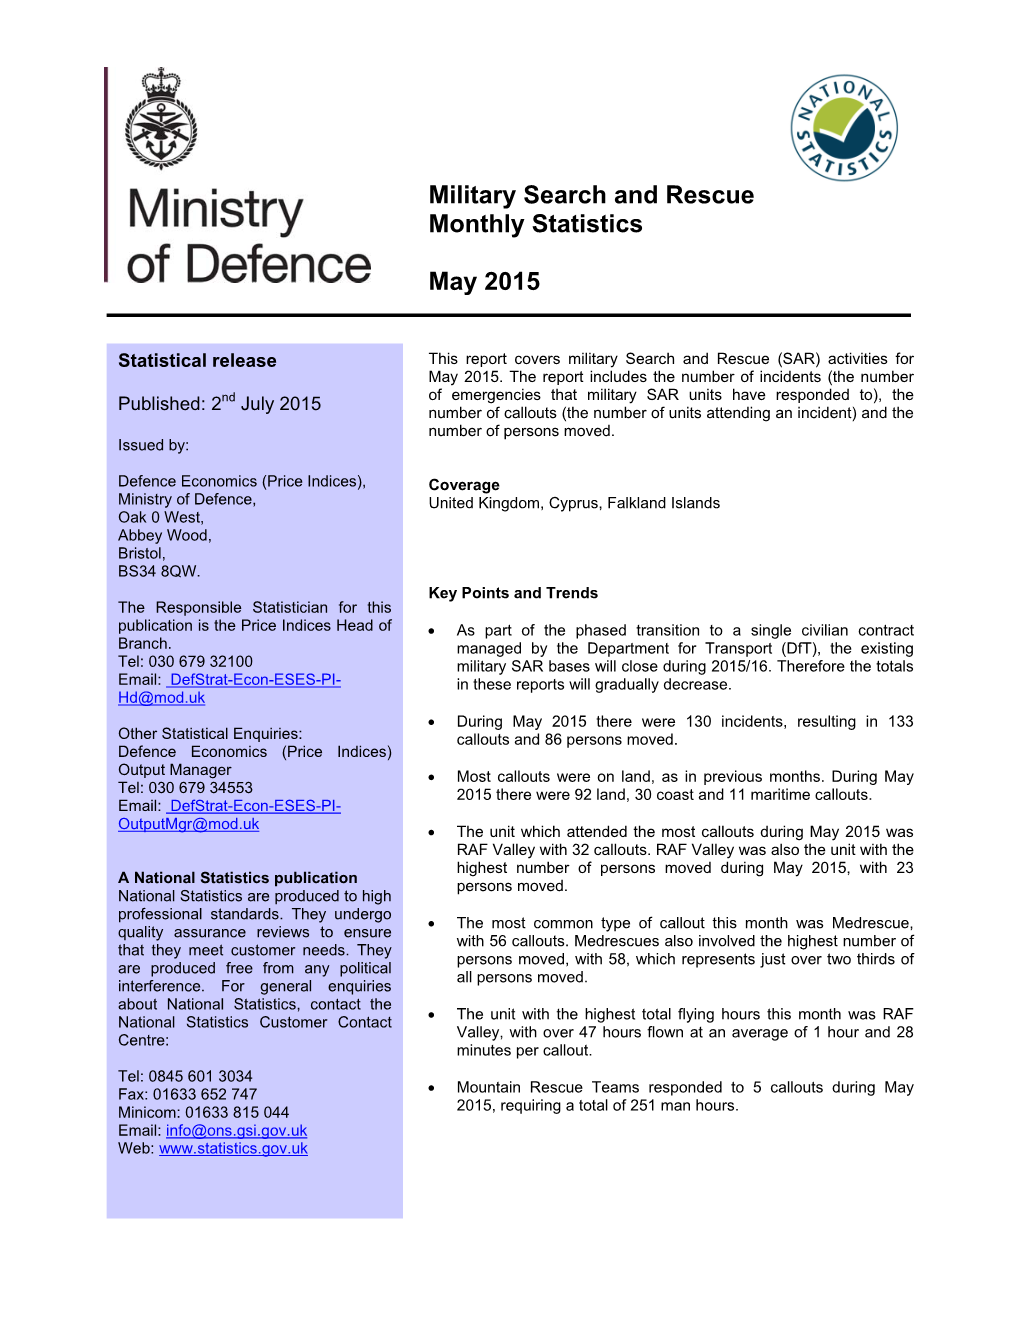 Military Search and Rescue Monthly Statistics